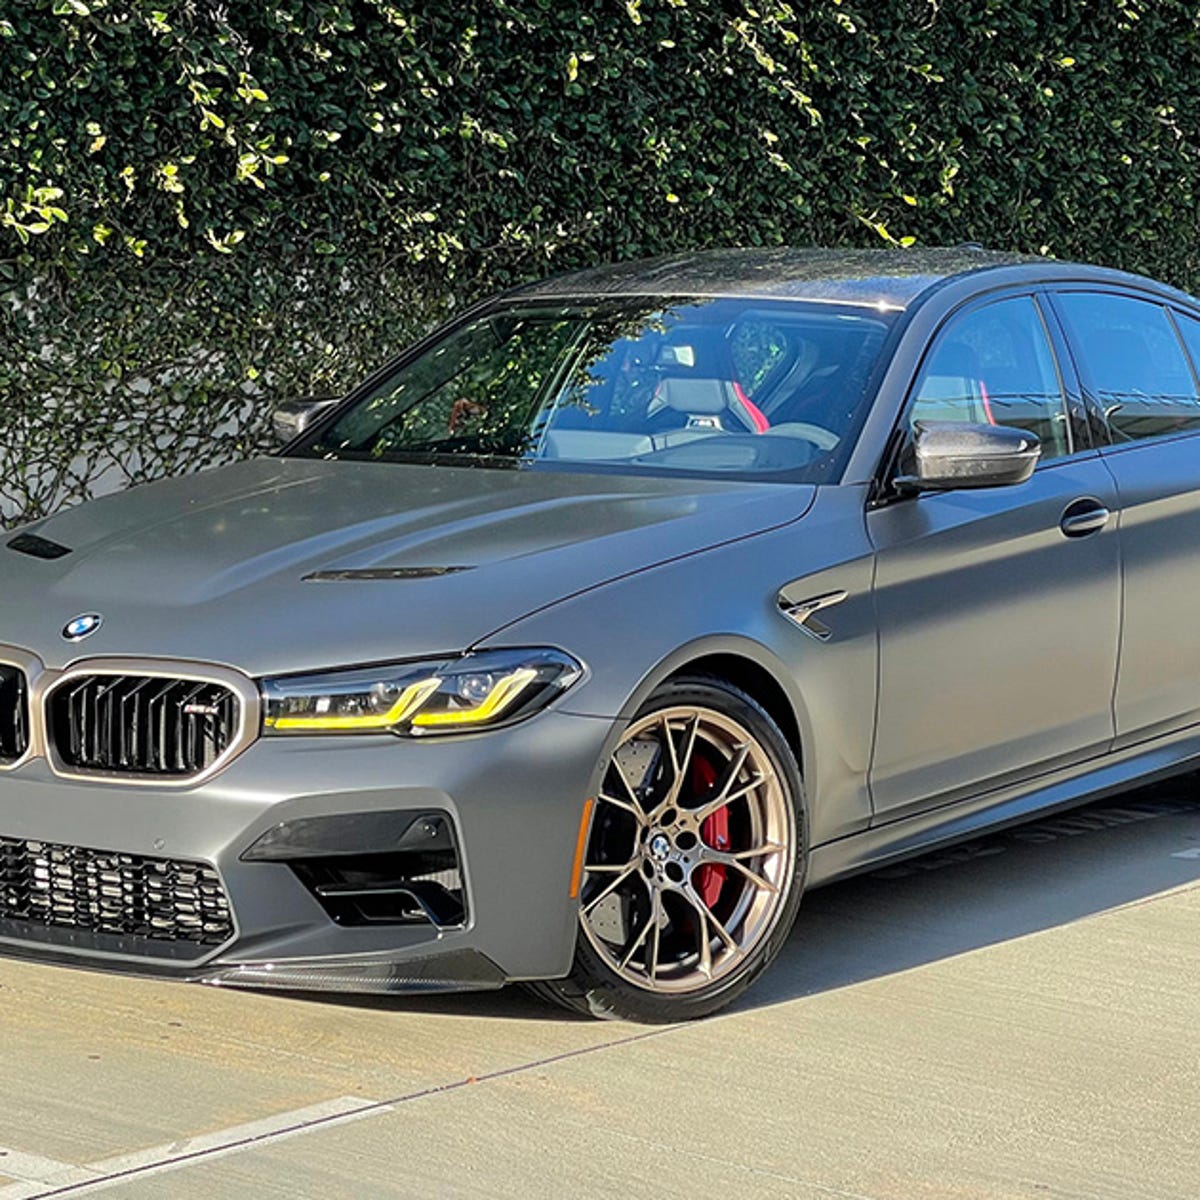 2022 BMW M5 CS review: Go for the gold - CNET